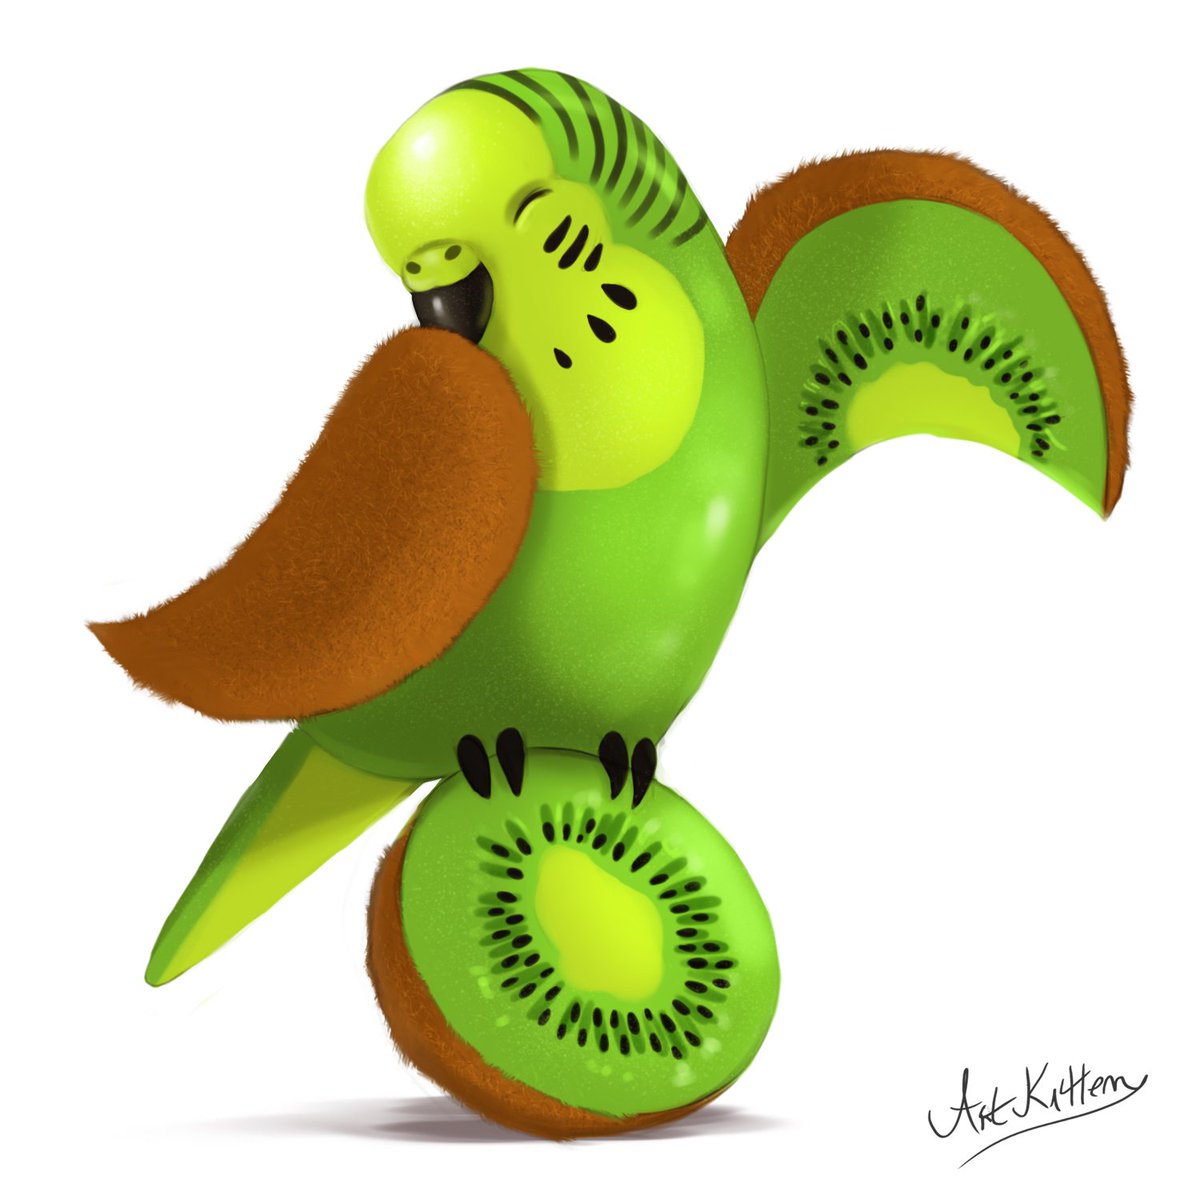 How To Draw A Kiwi Bird, Step by Step, Drawing Guide, by Dawn - DragoArt